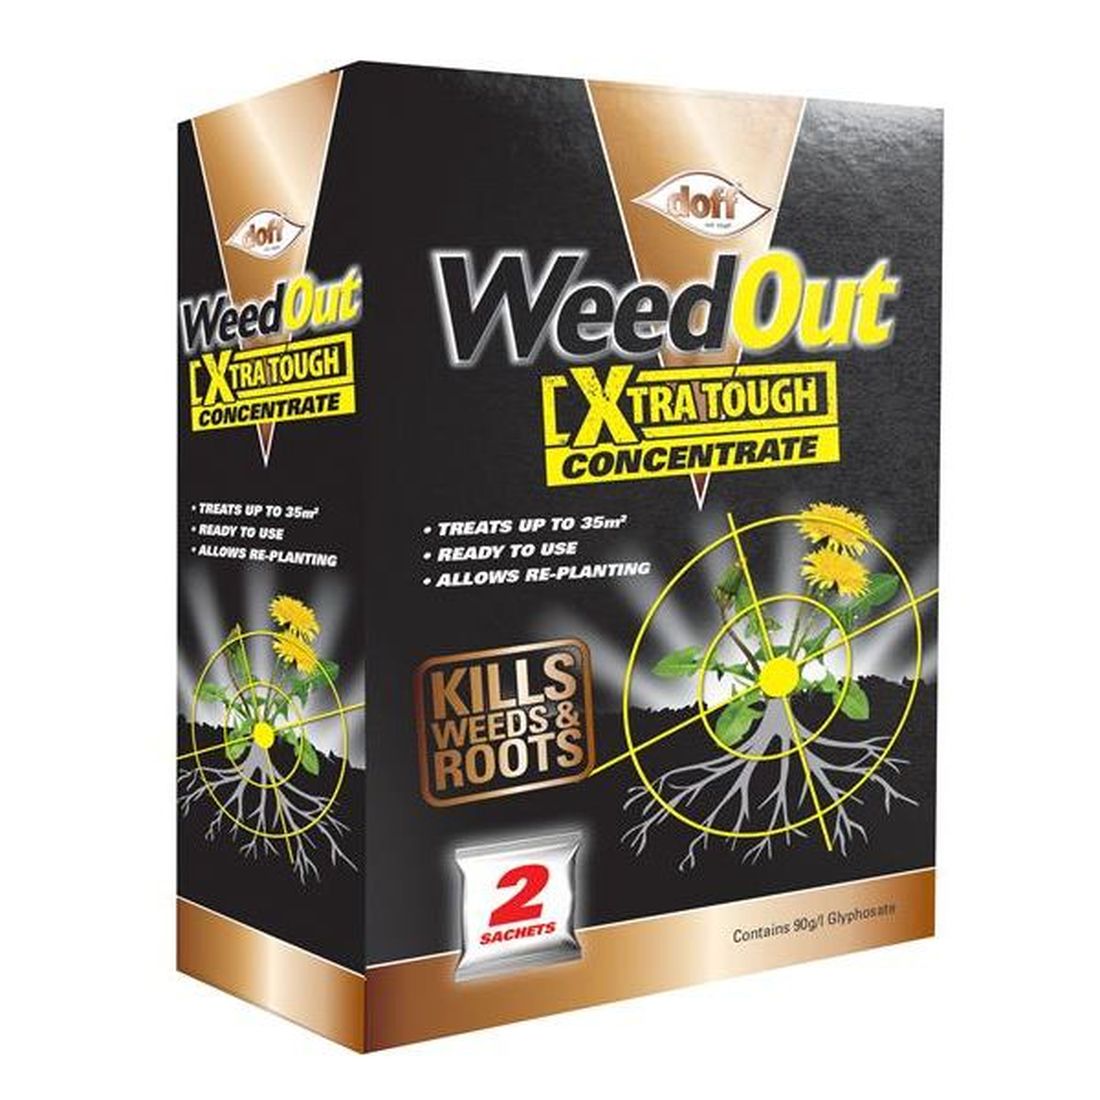 DOFF WeedOut Xtra Tough Weedkiller Concentrate 2 x Sachets                           